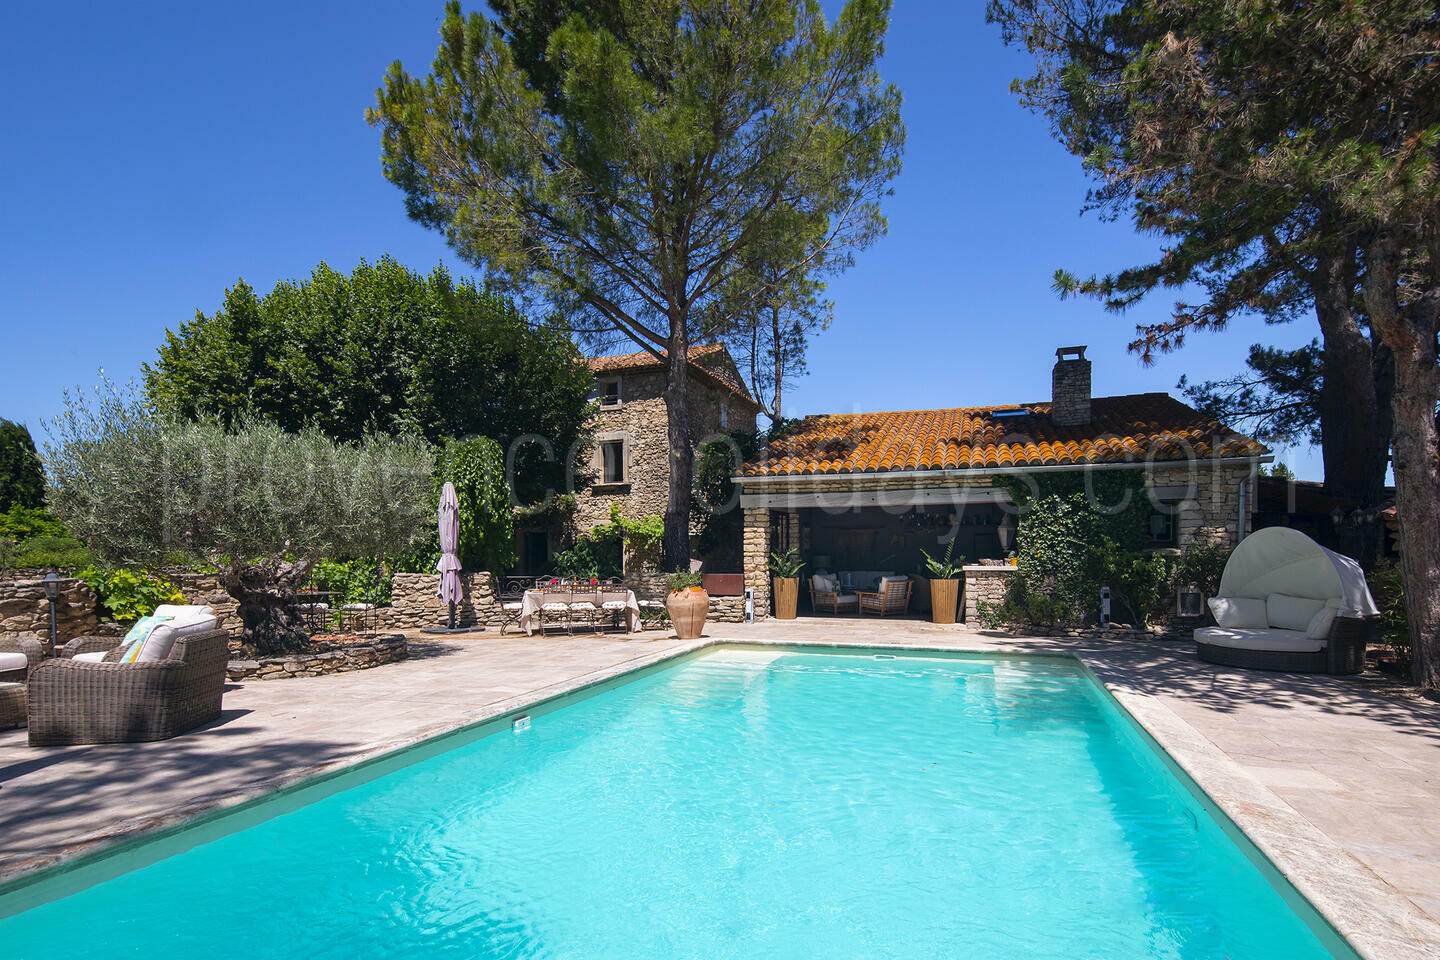 House for sale with heated swimming pool near Isle-sur-la-Sorgue 1 - House for sale with heated swimming pool near Isle-sur-la-Sorgue: Villa: Pool